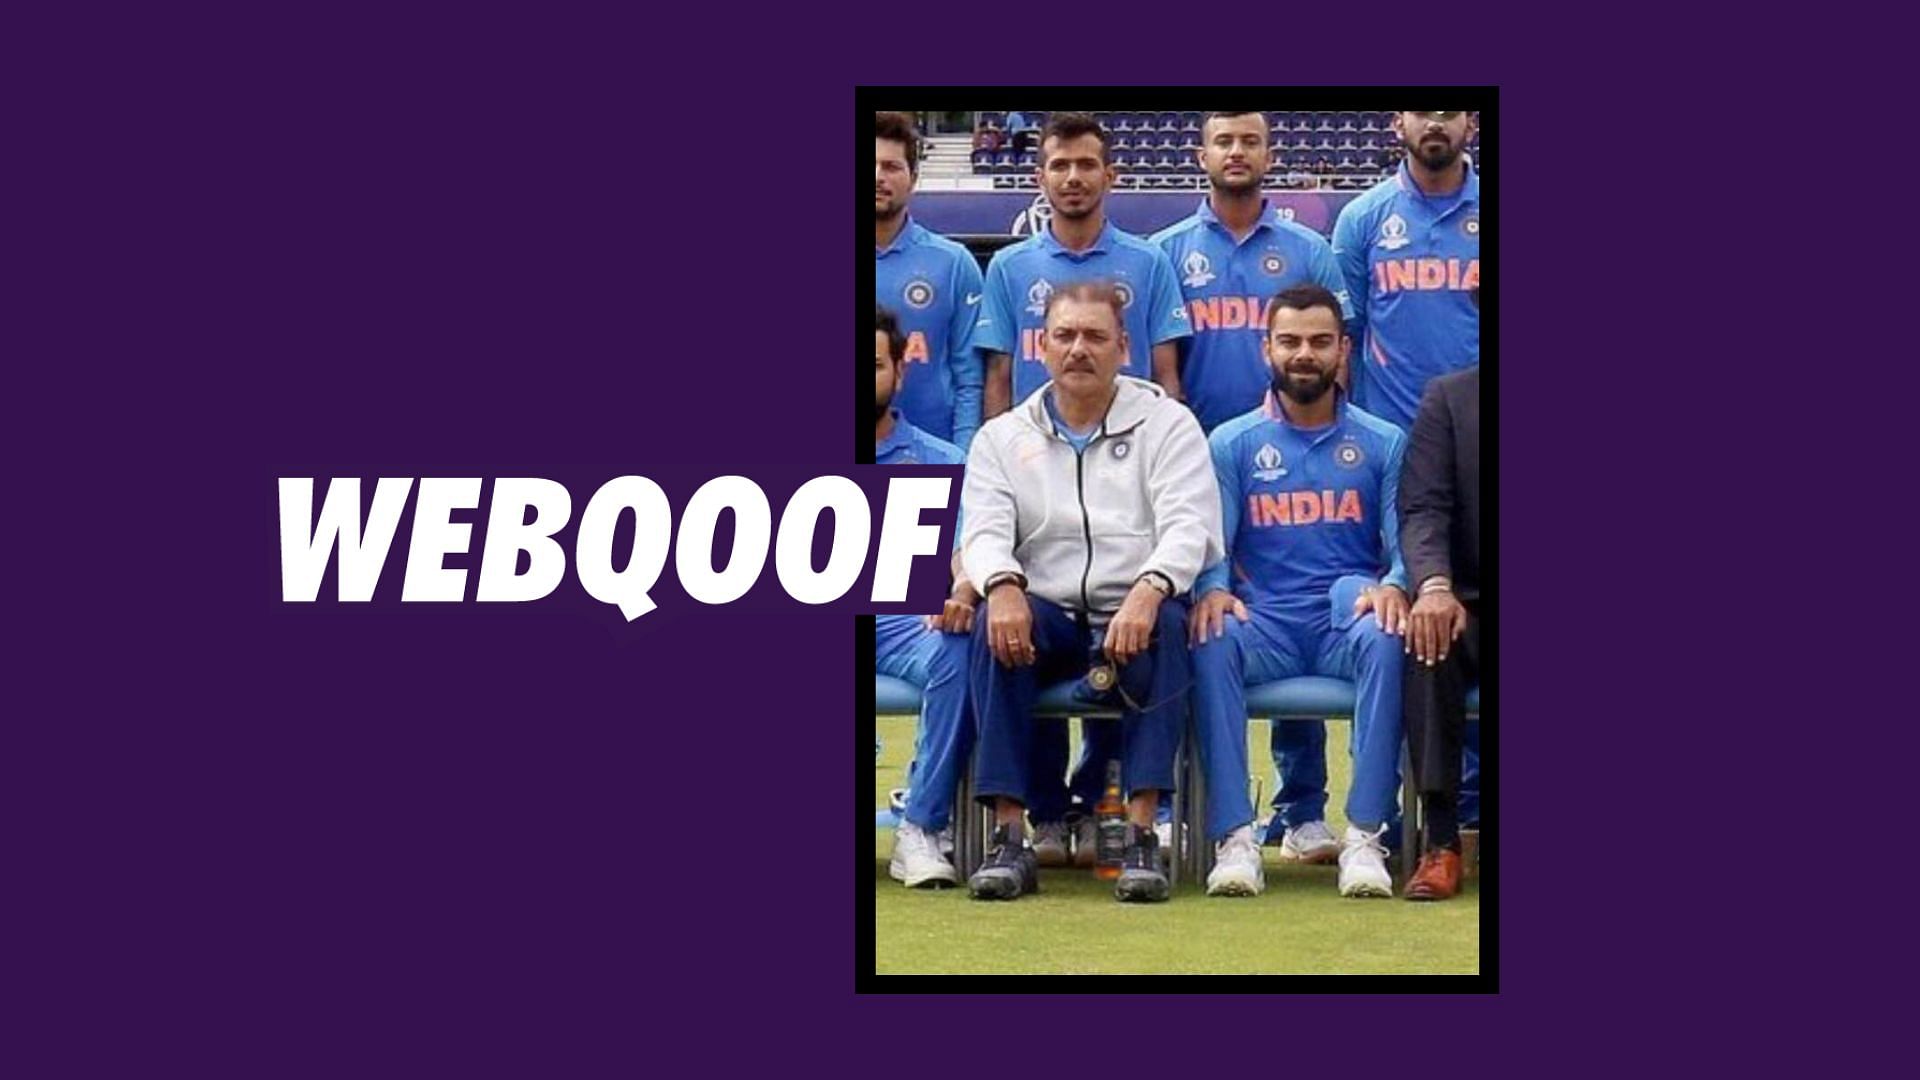 A viral image falsely claimed that a liquor bottle was kept under Ravi Shastri’s chair.